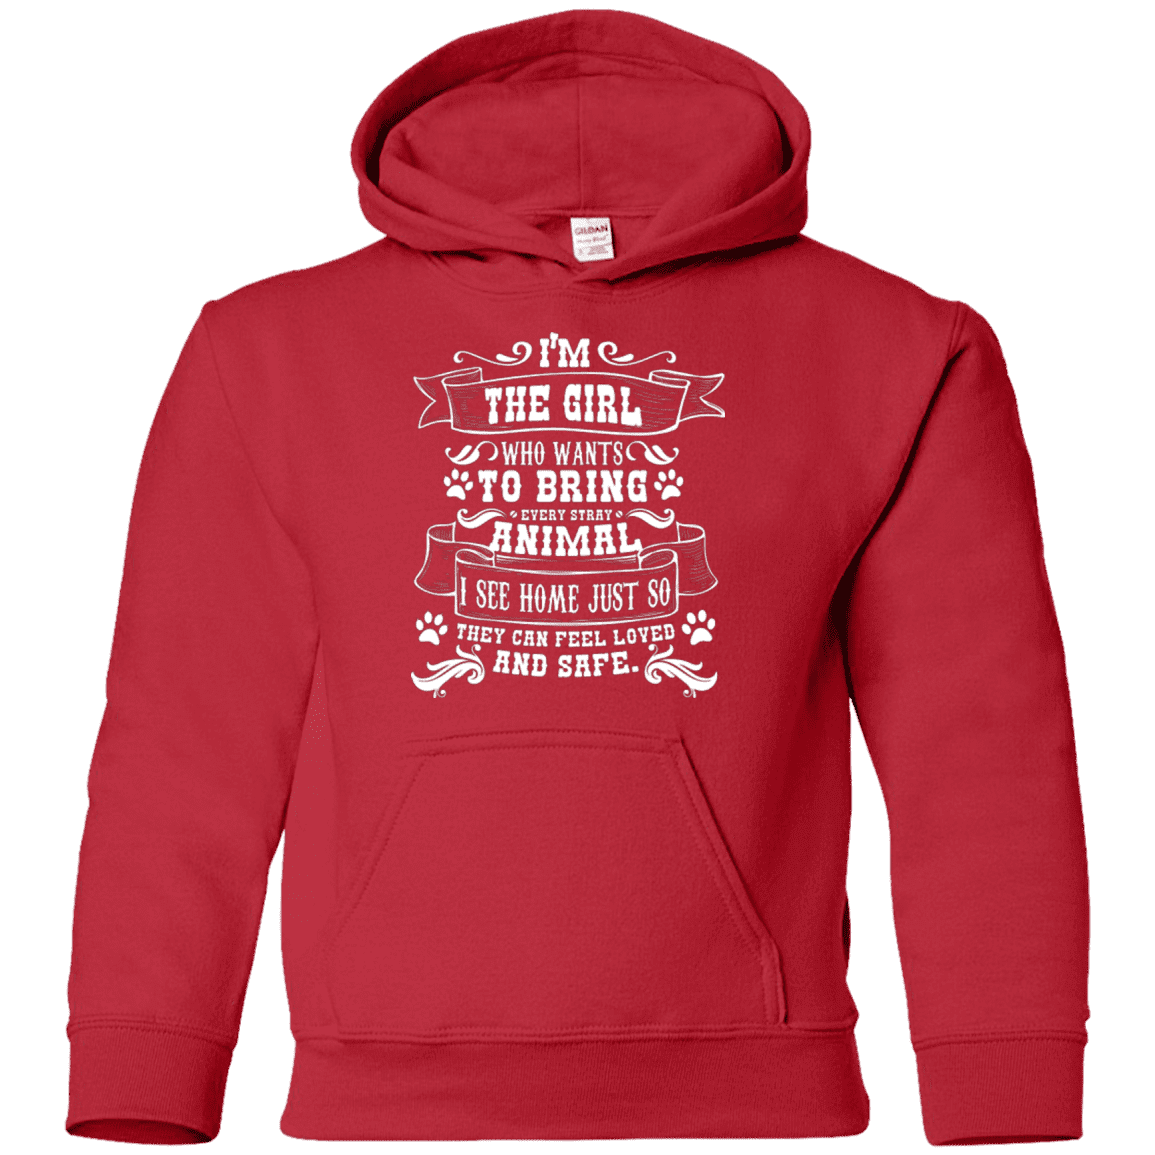 I'm The Girl - Youth Hoodie.